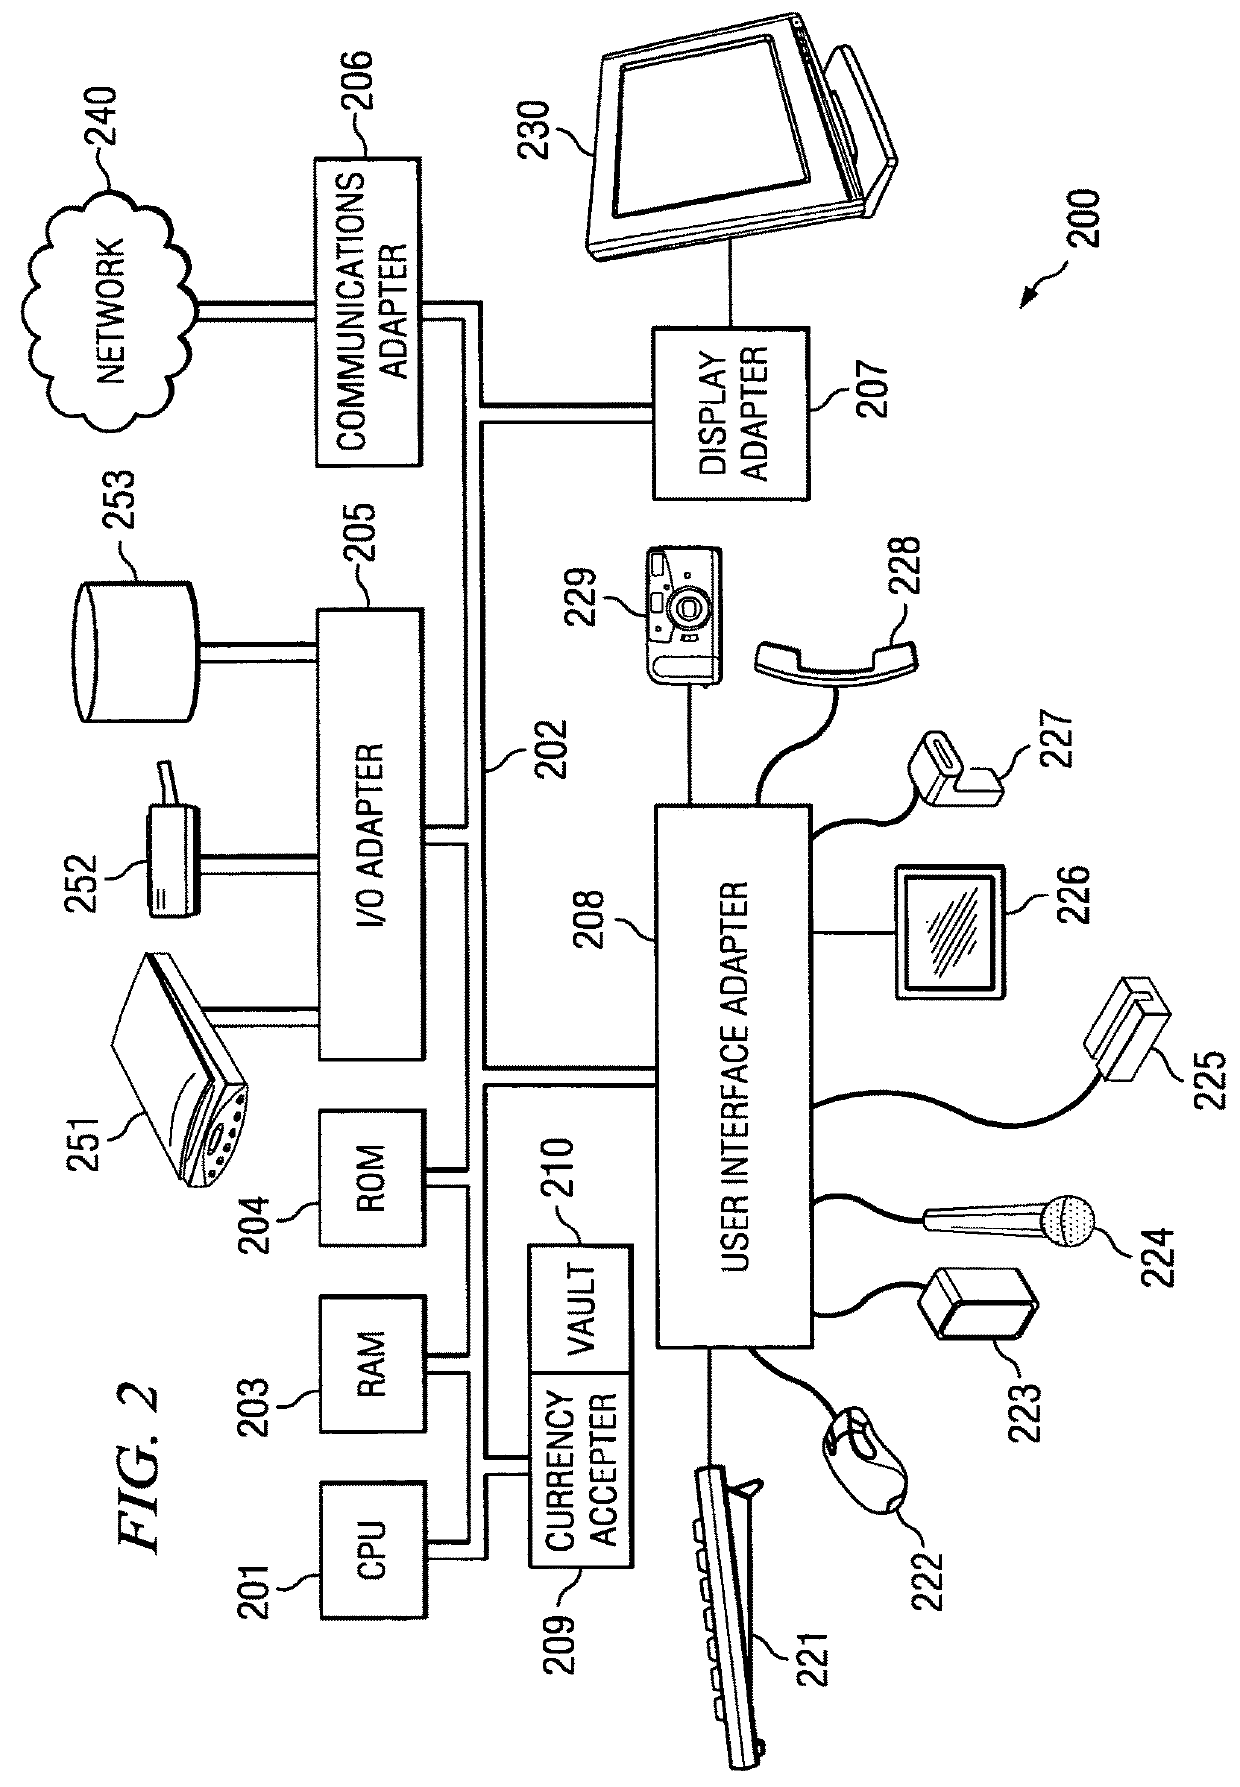 Processor-based self-service terminals used with respect to controlled environment facilities